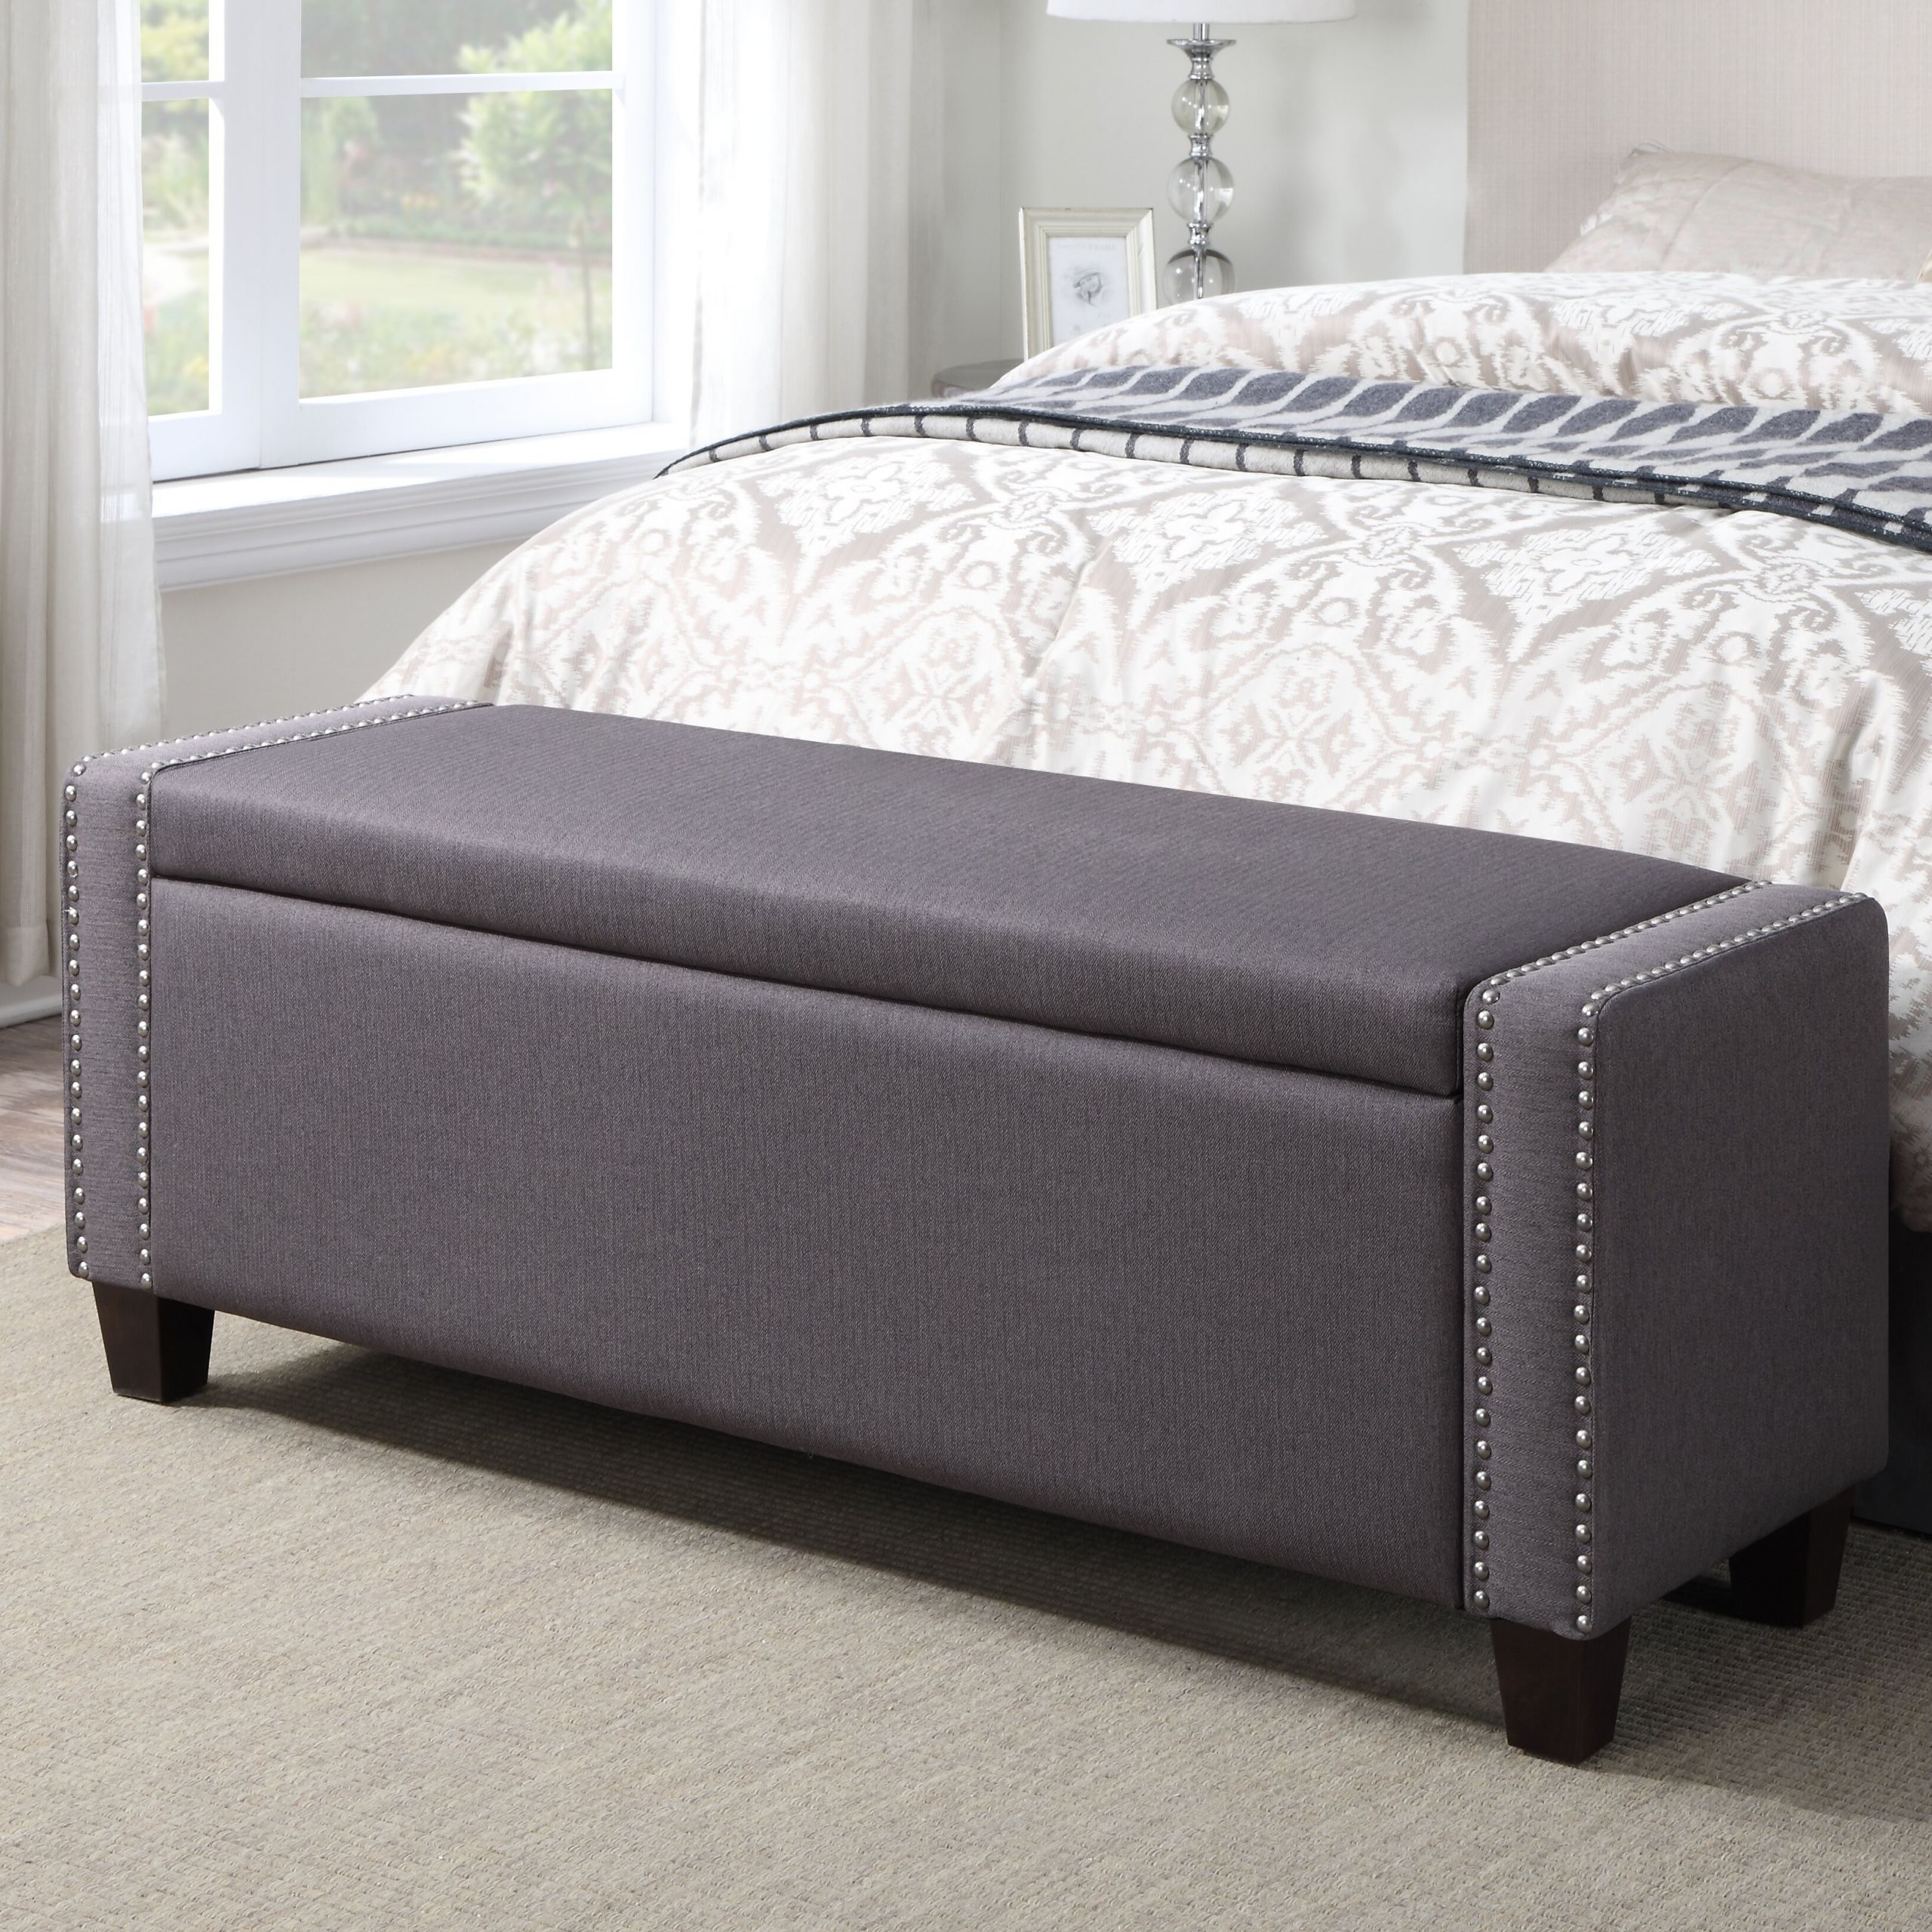 Bedroom Bench With Storage Best Of House Of Hampton Gistel Upholstered Storage Bedroom Bench Of Bedroom Bench With Storage Scaled 